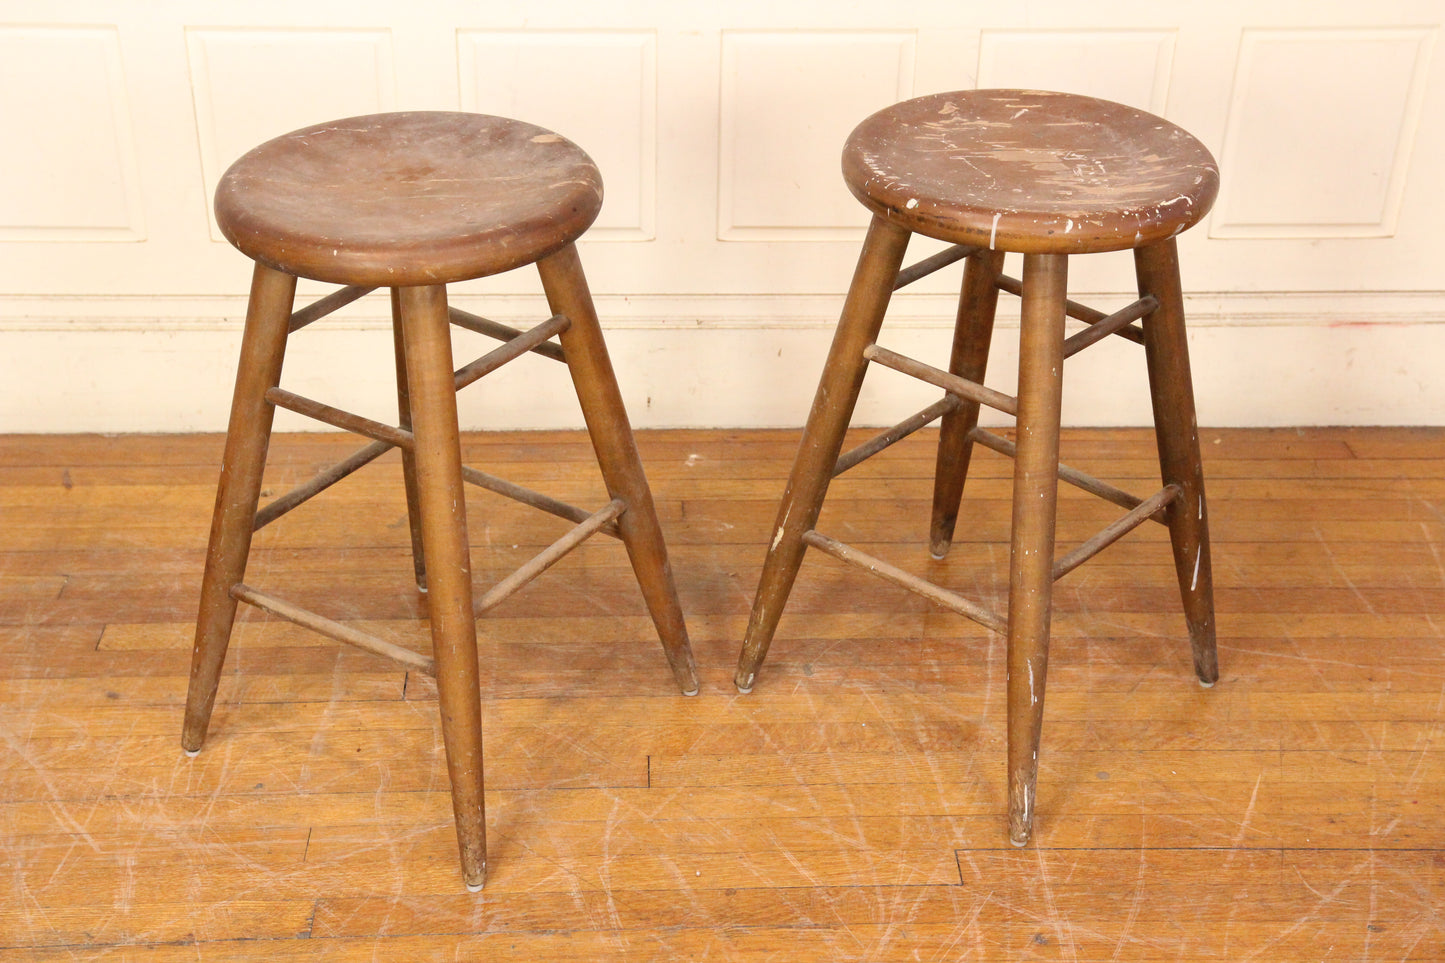 Pair of Vintage Wood Stools Made in Maine State Prison at Thomaston